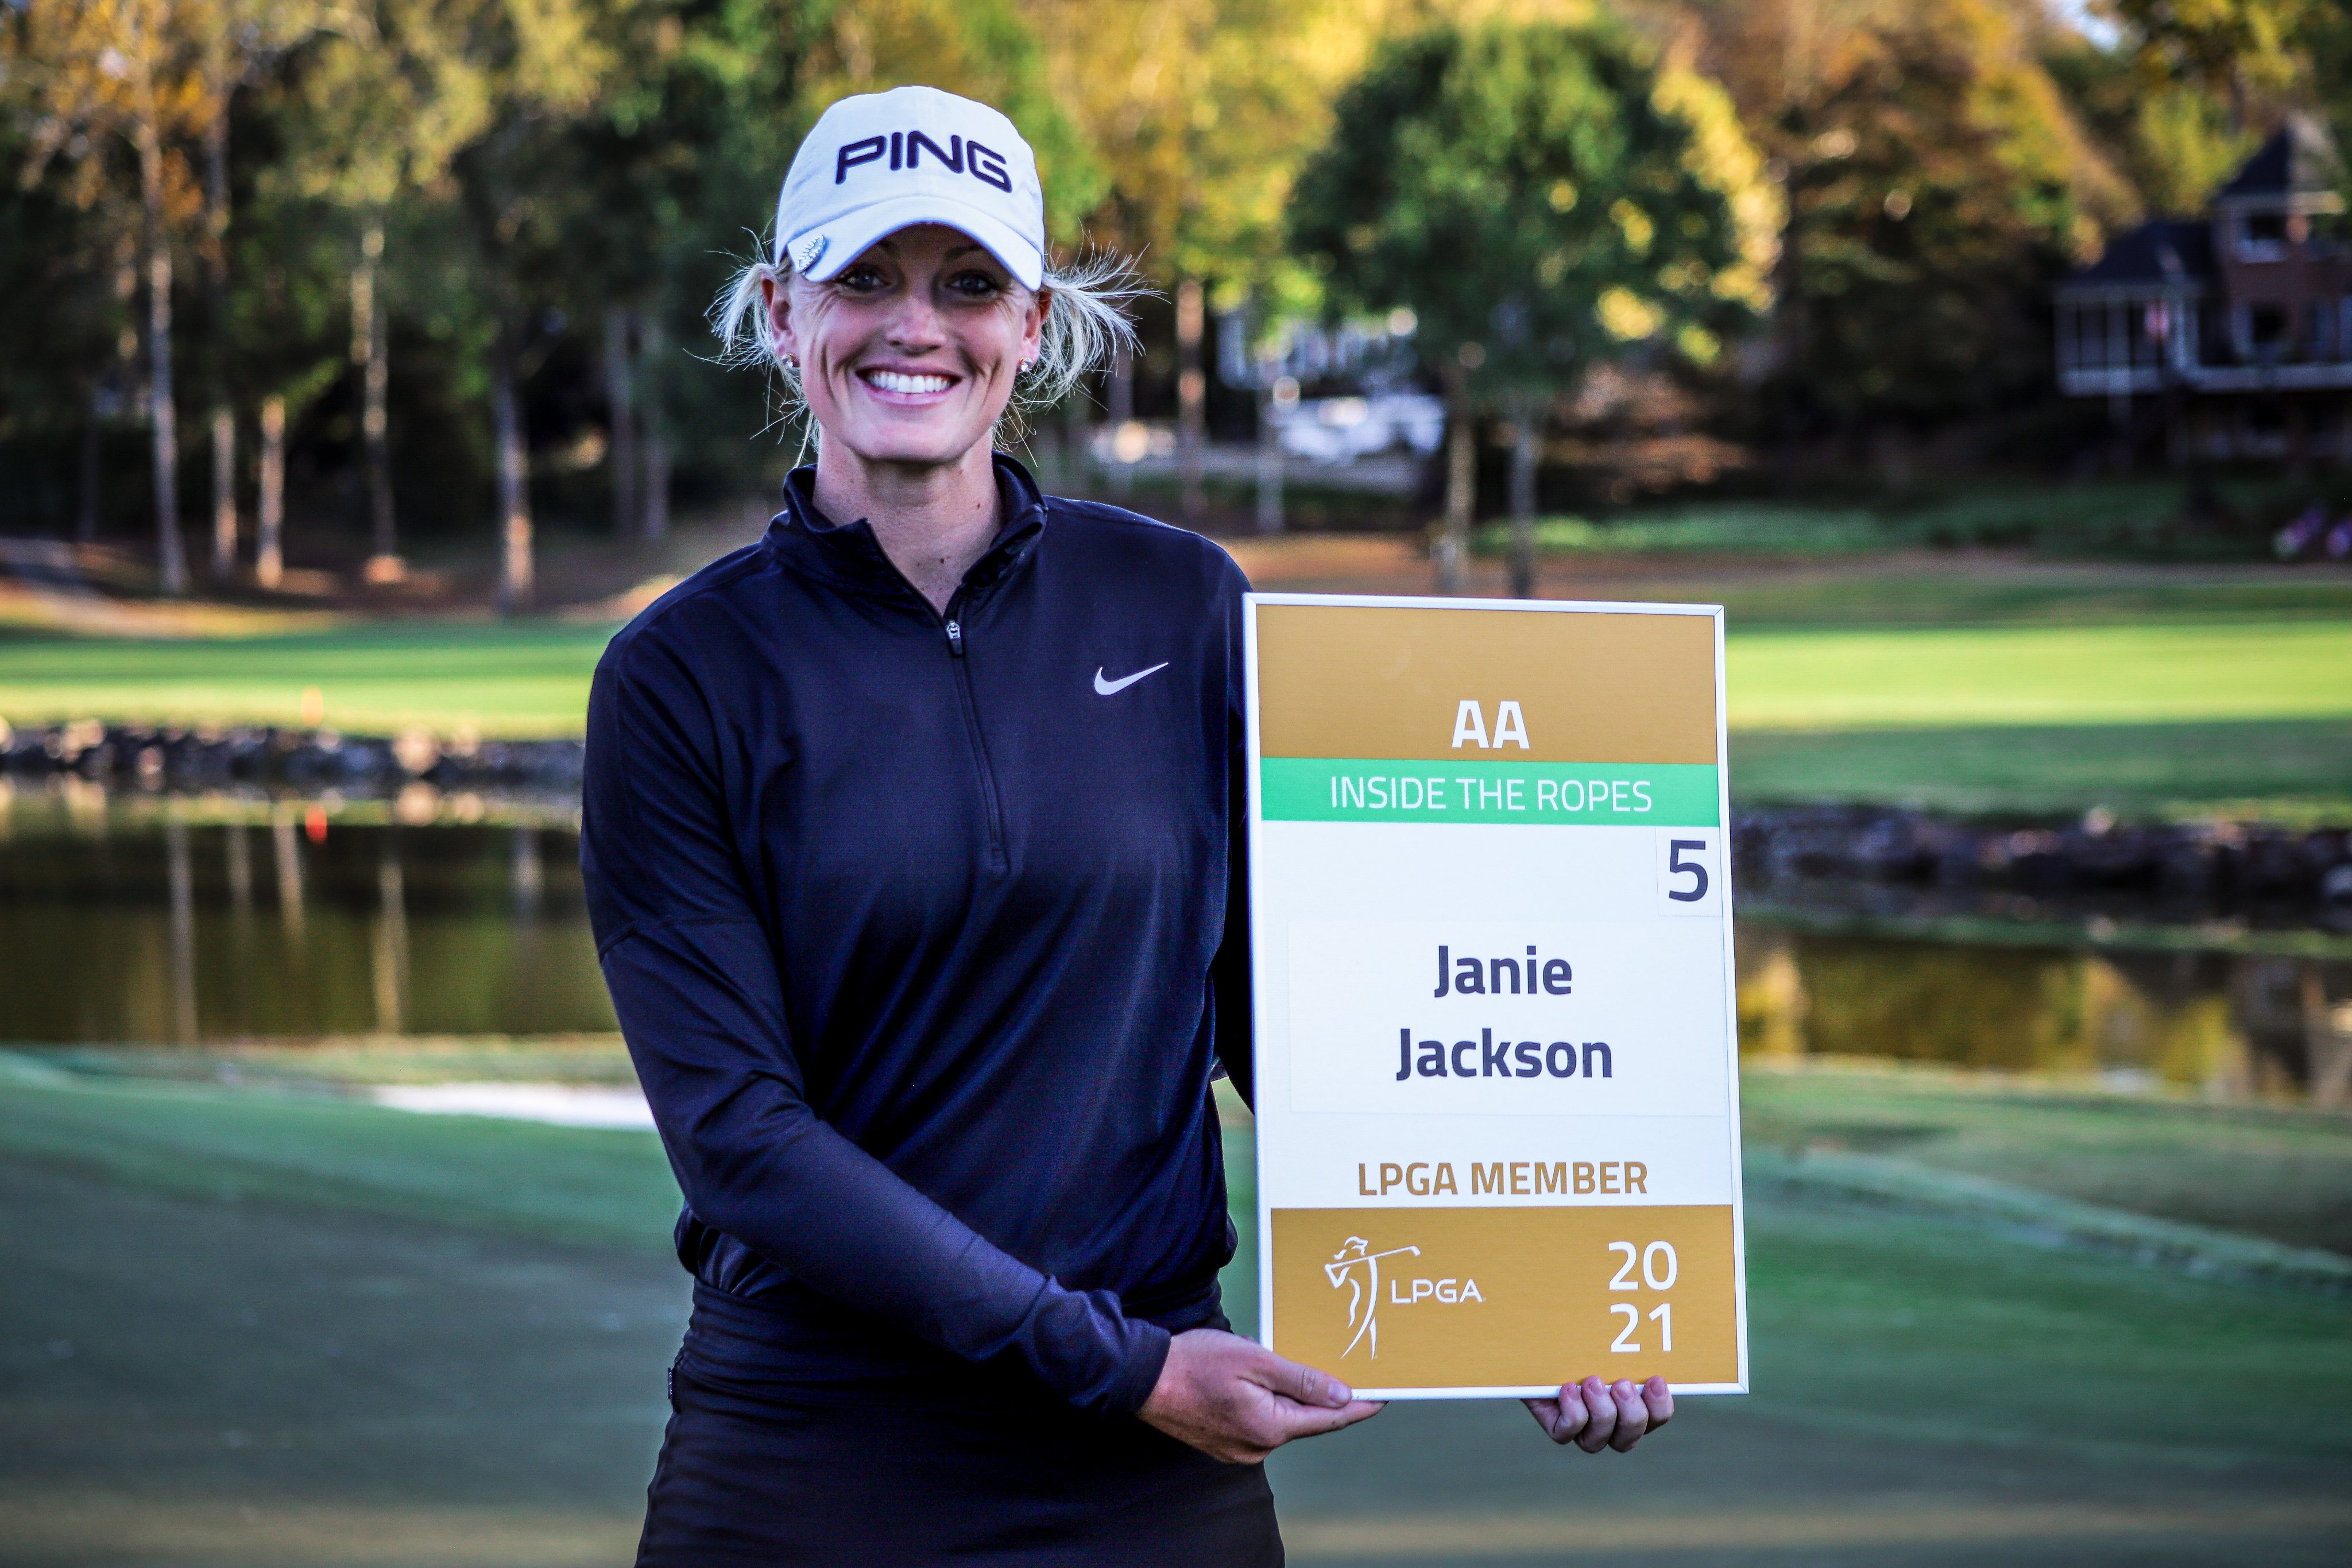 Janie Jackson posing with a sign that mentions her name as an LPGA Member